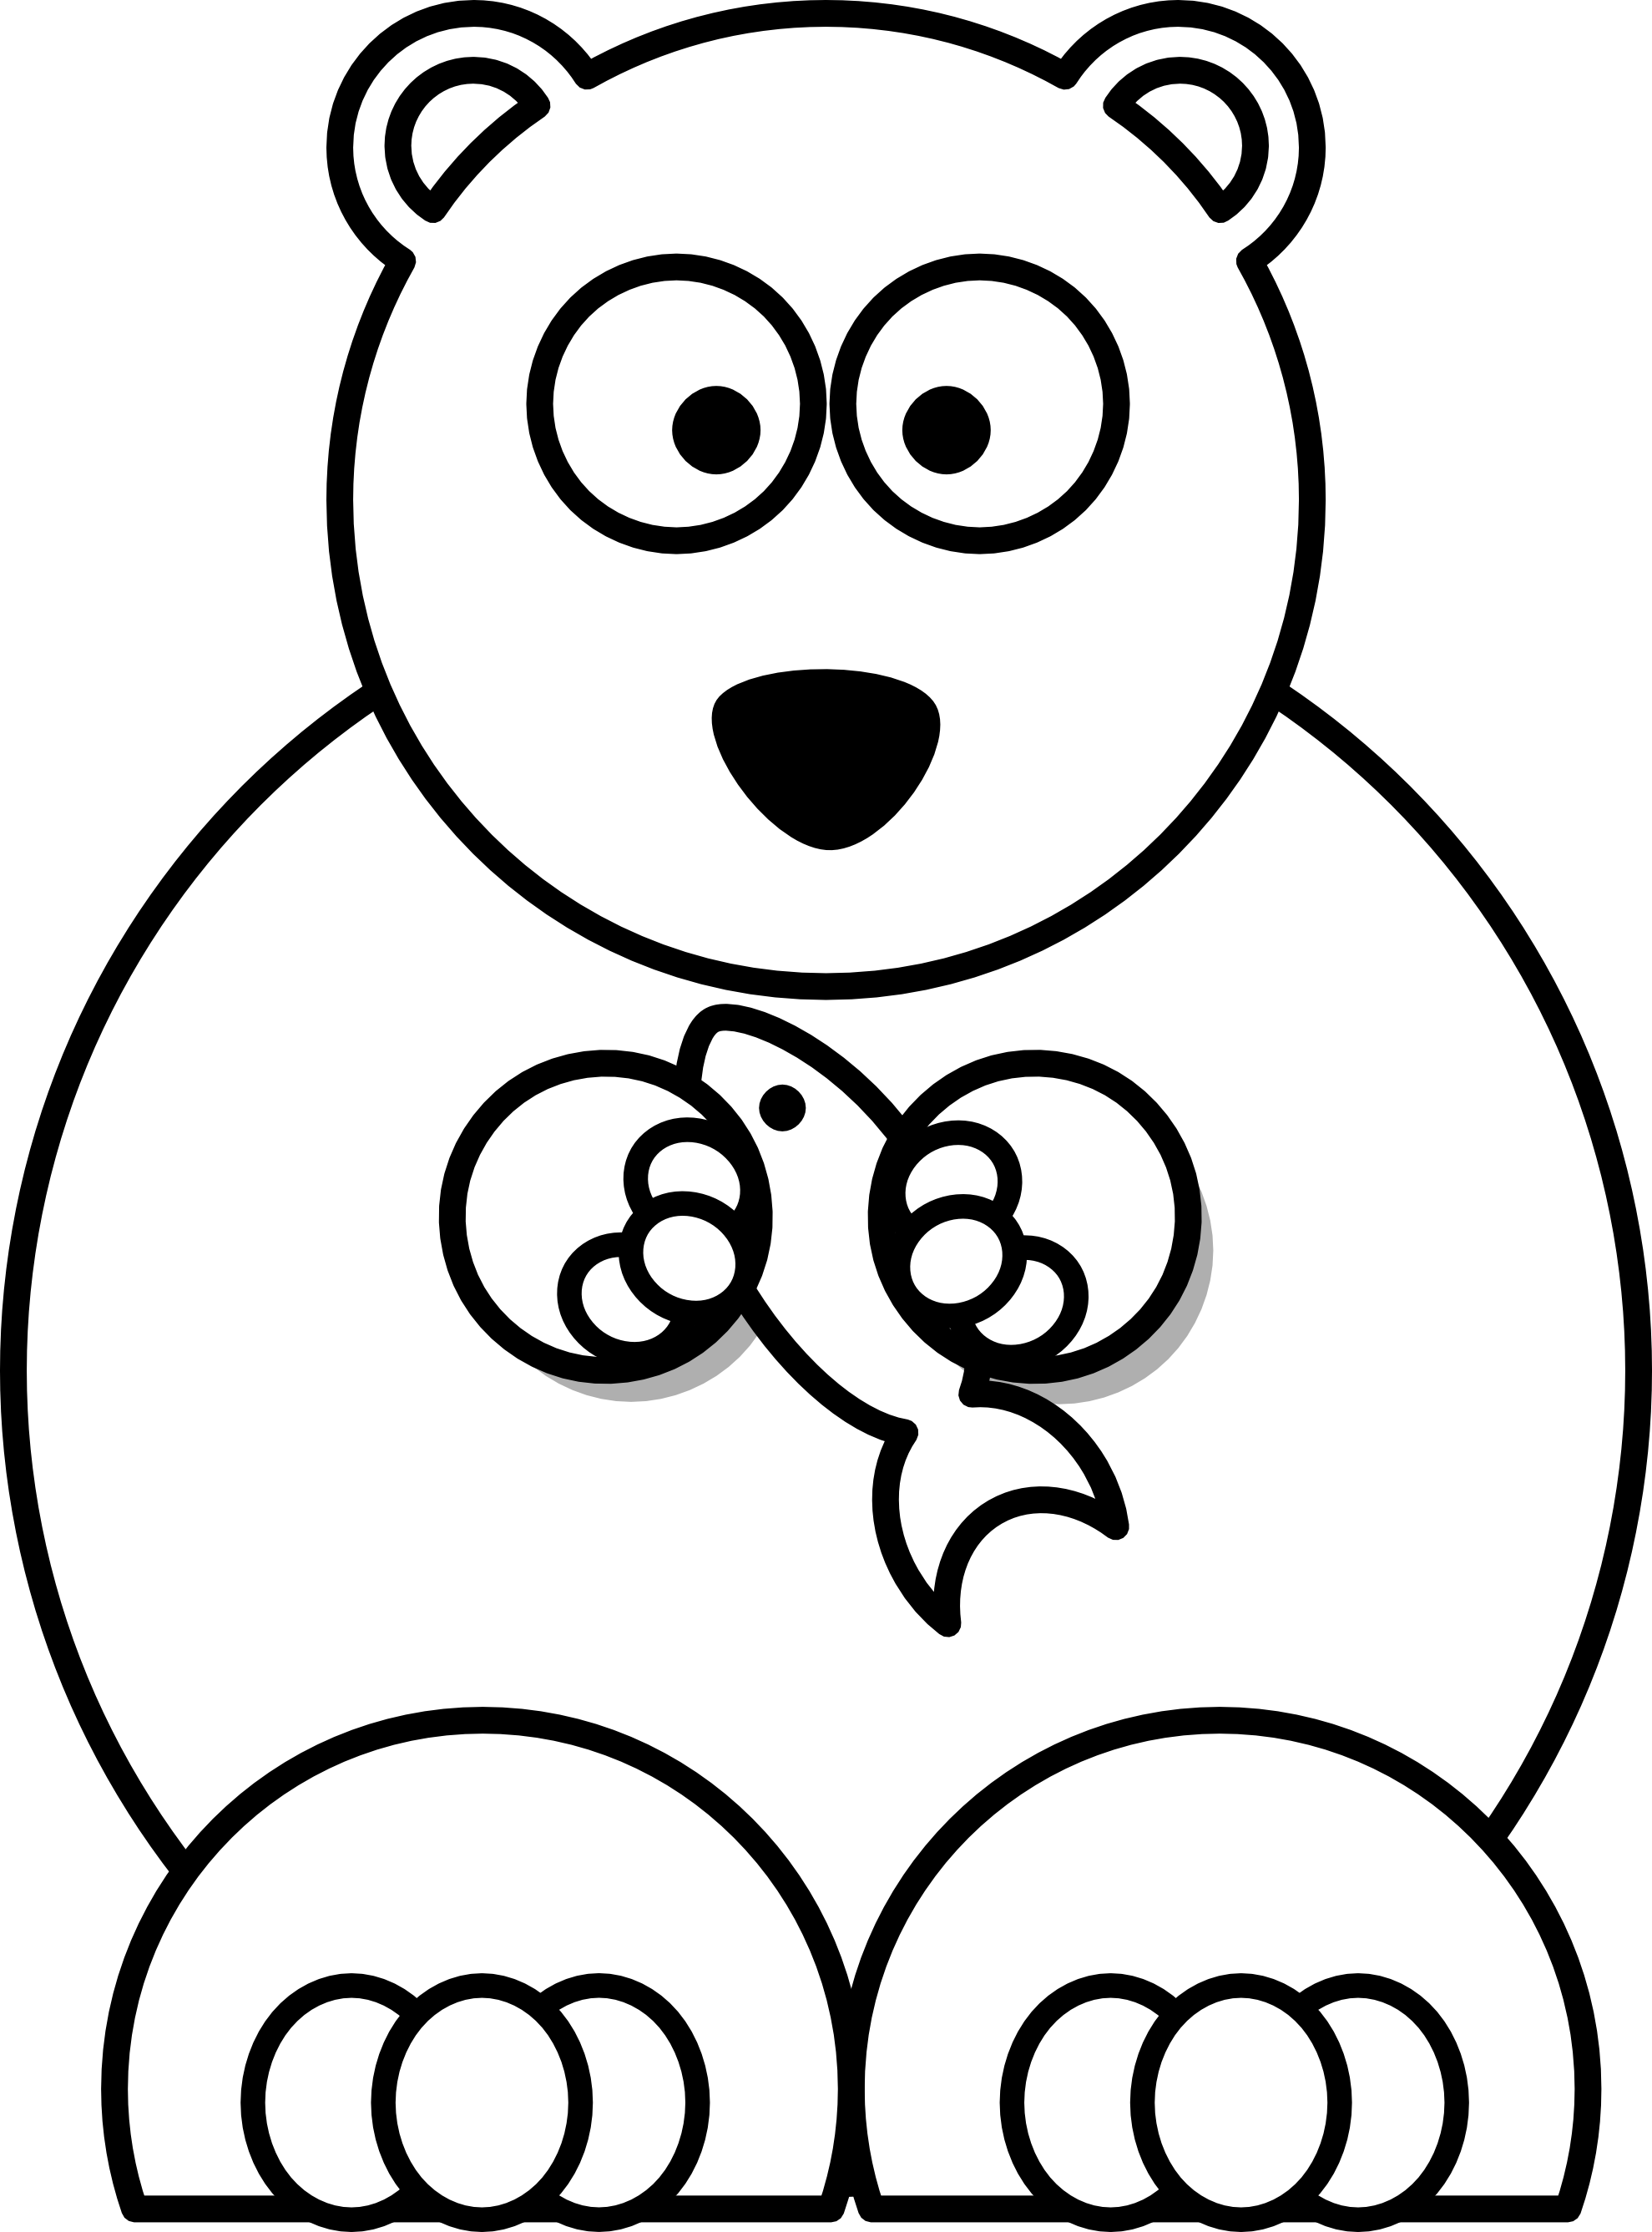 clipart teddy bear black and white - photo #17